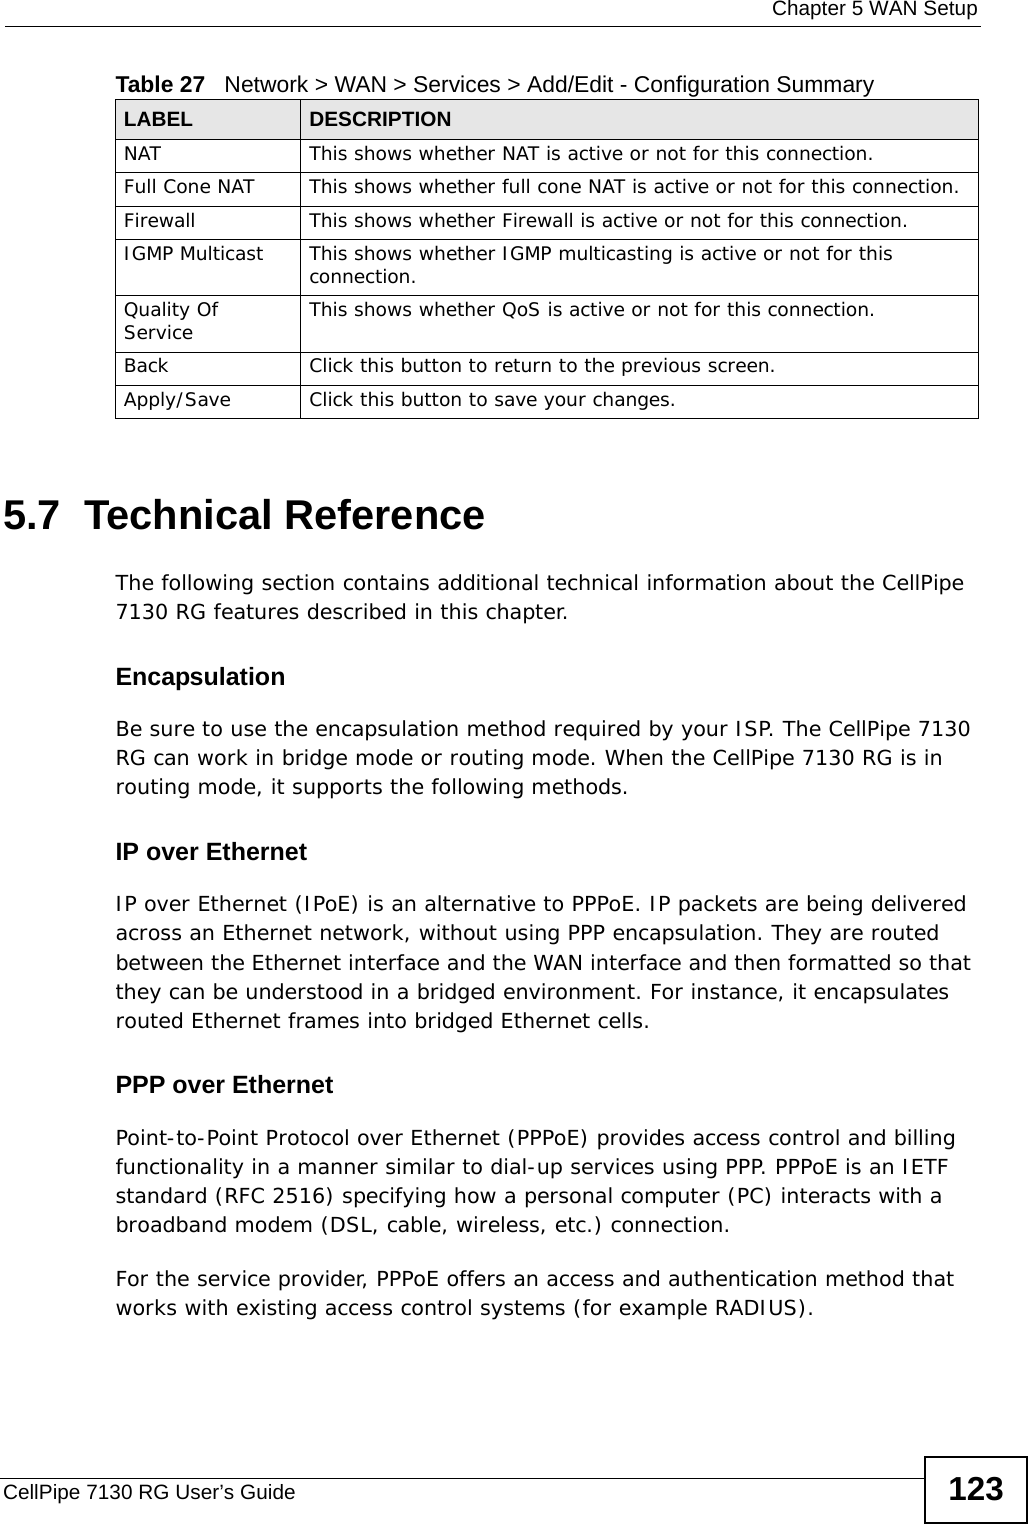  Chapter 5 WAN SetupCellPipe 7130 RG User’s Guide 1235.7  Technical ReferenceThe following section contains additional technical information about the CellPipe 7130 RG features described in this chapter.EncapsulationBe sure to use the encapsulation method required by your ISP. The CellPipe 7130 RG can work in bridge mode or routing mode. When the CellPipe 7130 RG is in routing mode, it supports the following methods.IP over Ethernet IP over Ethernet (IPoE) is an alternative to PPPoE. IP packets are being delivered across an Ethernet network, without using PPP encapsulation. They are routed between the Ethernet interface and the WAN interface and then formatted so that they can be understood in a bridged environment. For instance, it encapsulates routed Ethernet frames into bridged Ethernet cells. PPP over EthernetPoint-to-Point Protocol over Ethernet (PPPoE) provides access control and billing functionality in a manner similar to dial-up services using PPP. PPPoE is an IETF standard (RFC 2516) specifying how a personal computer (PC) interacts with a broadband modem (DSL, cable, wireless, etc.) connection. For the service provider, PPPoE offers an access and authentication method that works with existing access control systems (for example RADIUS).NAT This shows whether NAT is active or not for this connection.Full Cone NAT This shows whether full cone NAT is active or not for this connection.Firewall This shows whether Firewall is active or not for this connection.IGMP Multicast This shows whether IGMP multicasting is active or not for this connection.Quality Of Service This shows whether QoS is active or not for this connection.Back Click this button to return to the previous screen.Apply/Save Click this button to save your changes.Table 27   Network &gt; WAN &gt; Services &gt; Add/Edit - Configuration SummaryLABEL DESCRIPTION